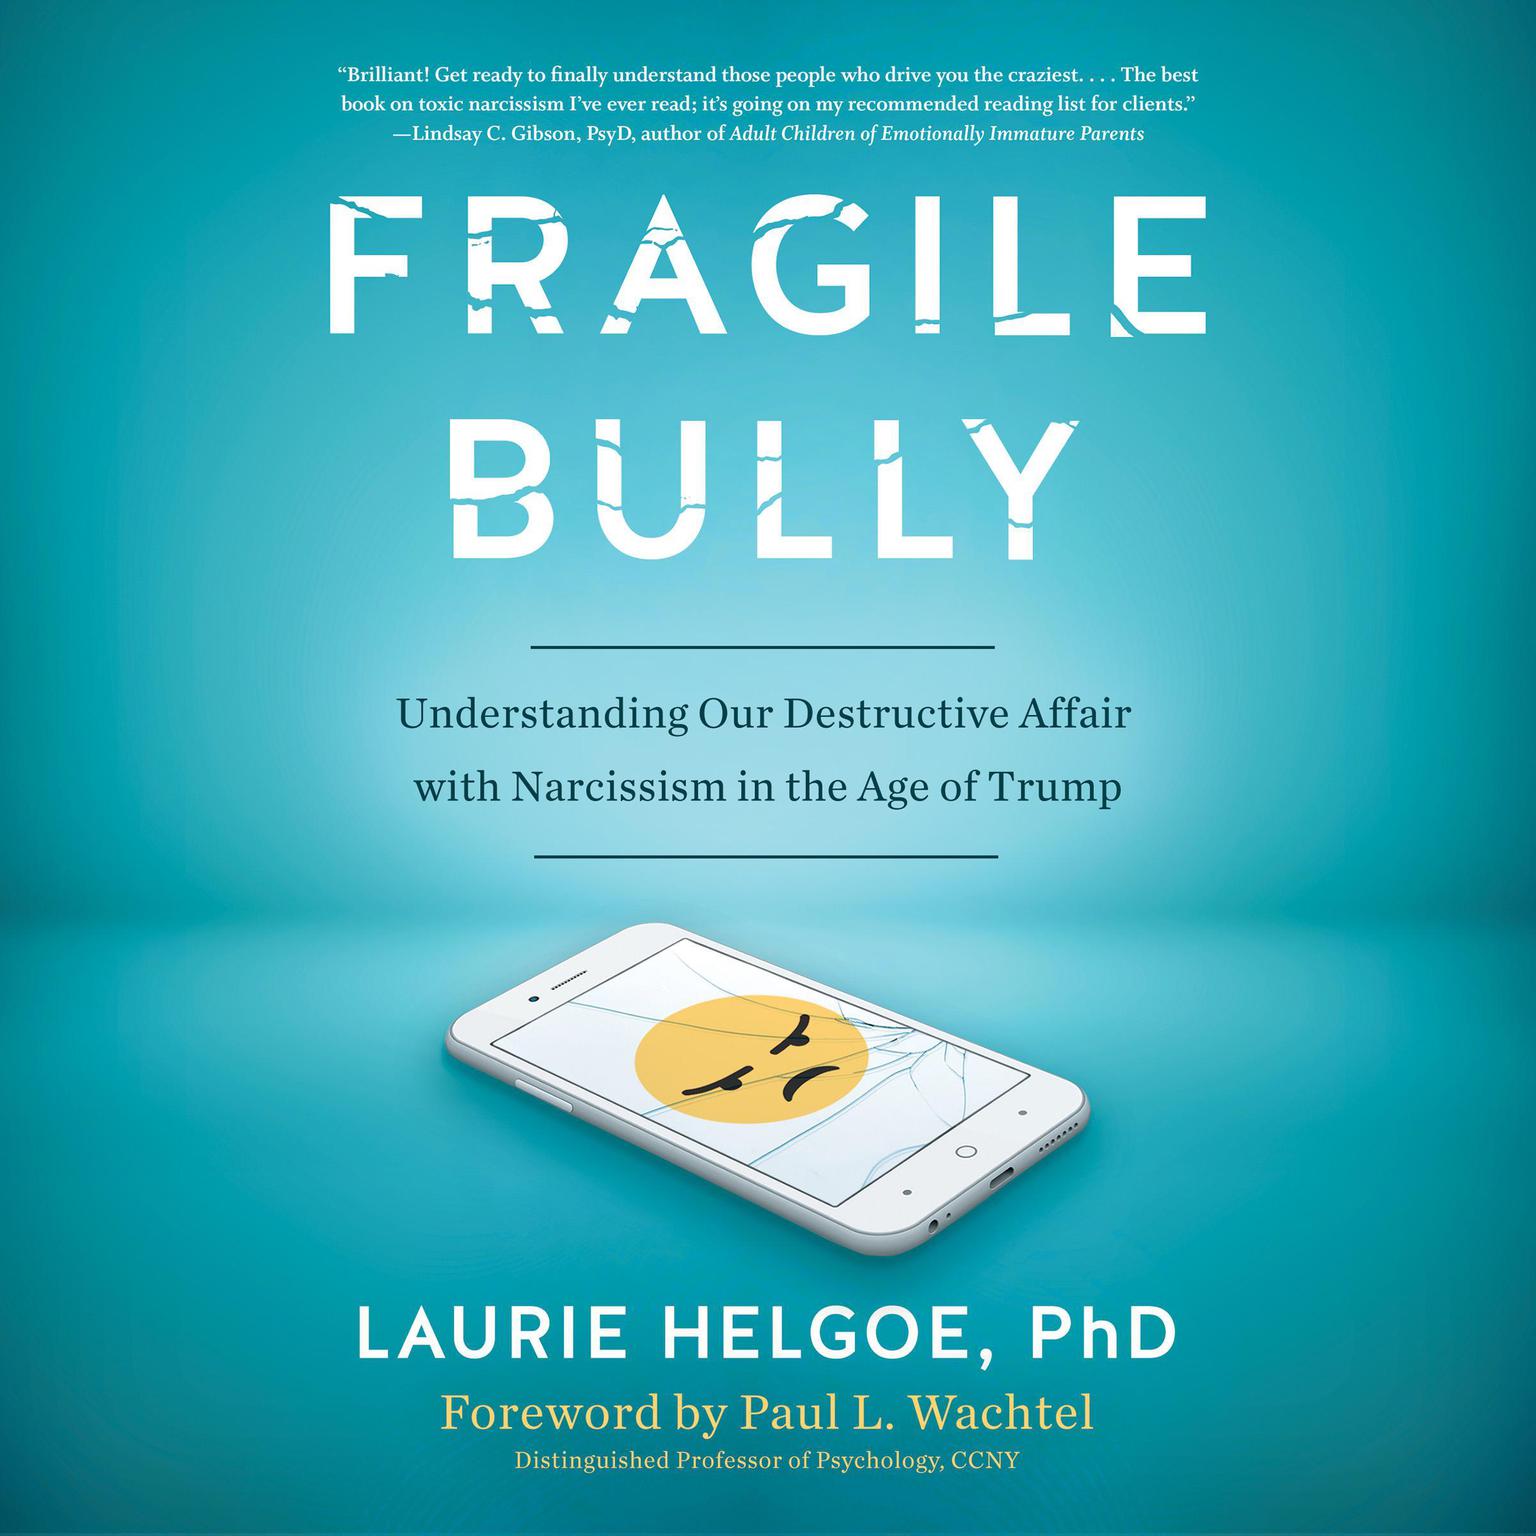 Fragile Bully: Understanding Our Destructive Affair With Narcissism in the Age of Trump Audiobook, by Laurie Helgoe